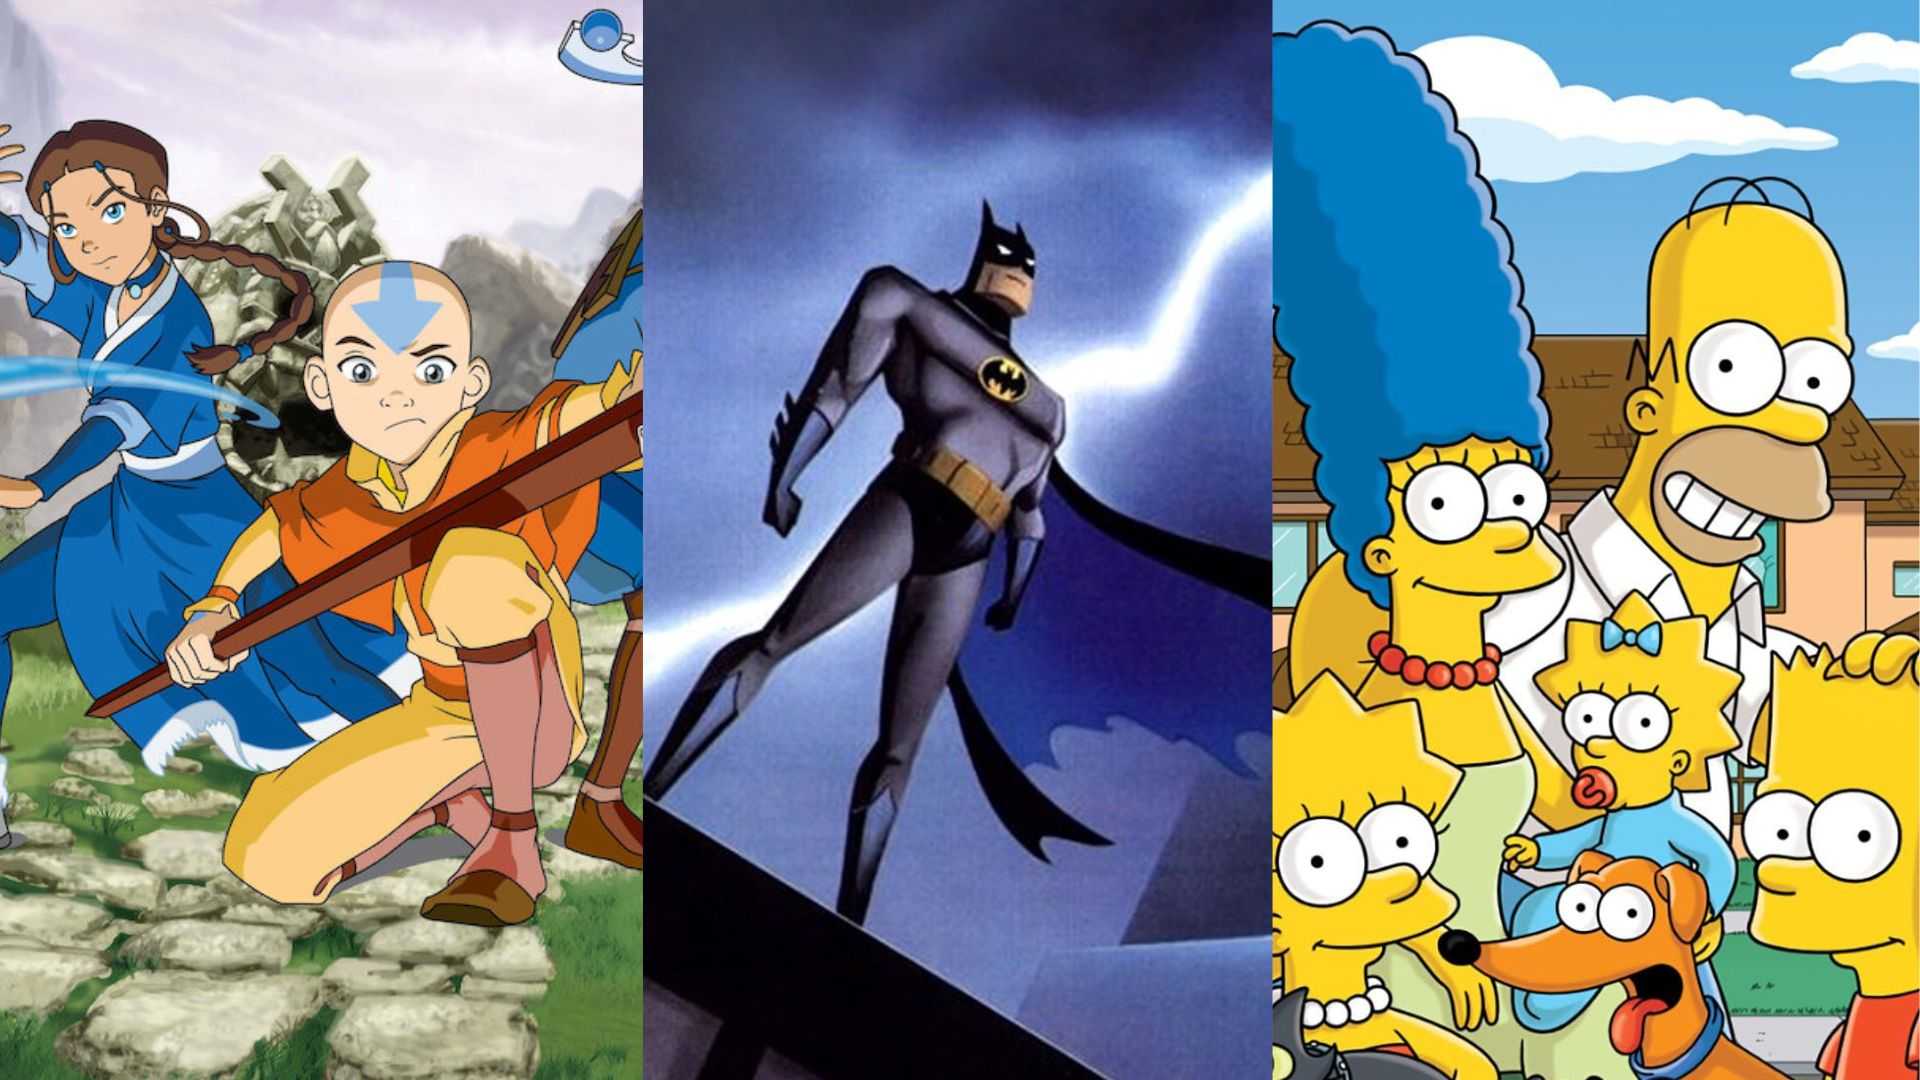 From The Last Airbender to BoJack Horseman - Ranking the top 5 animated shows of all time